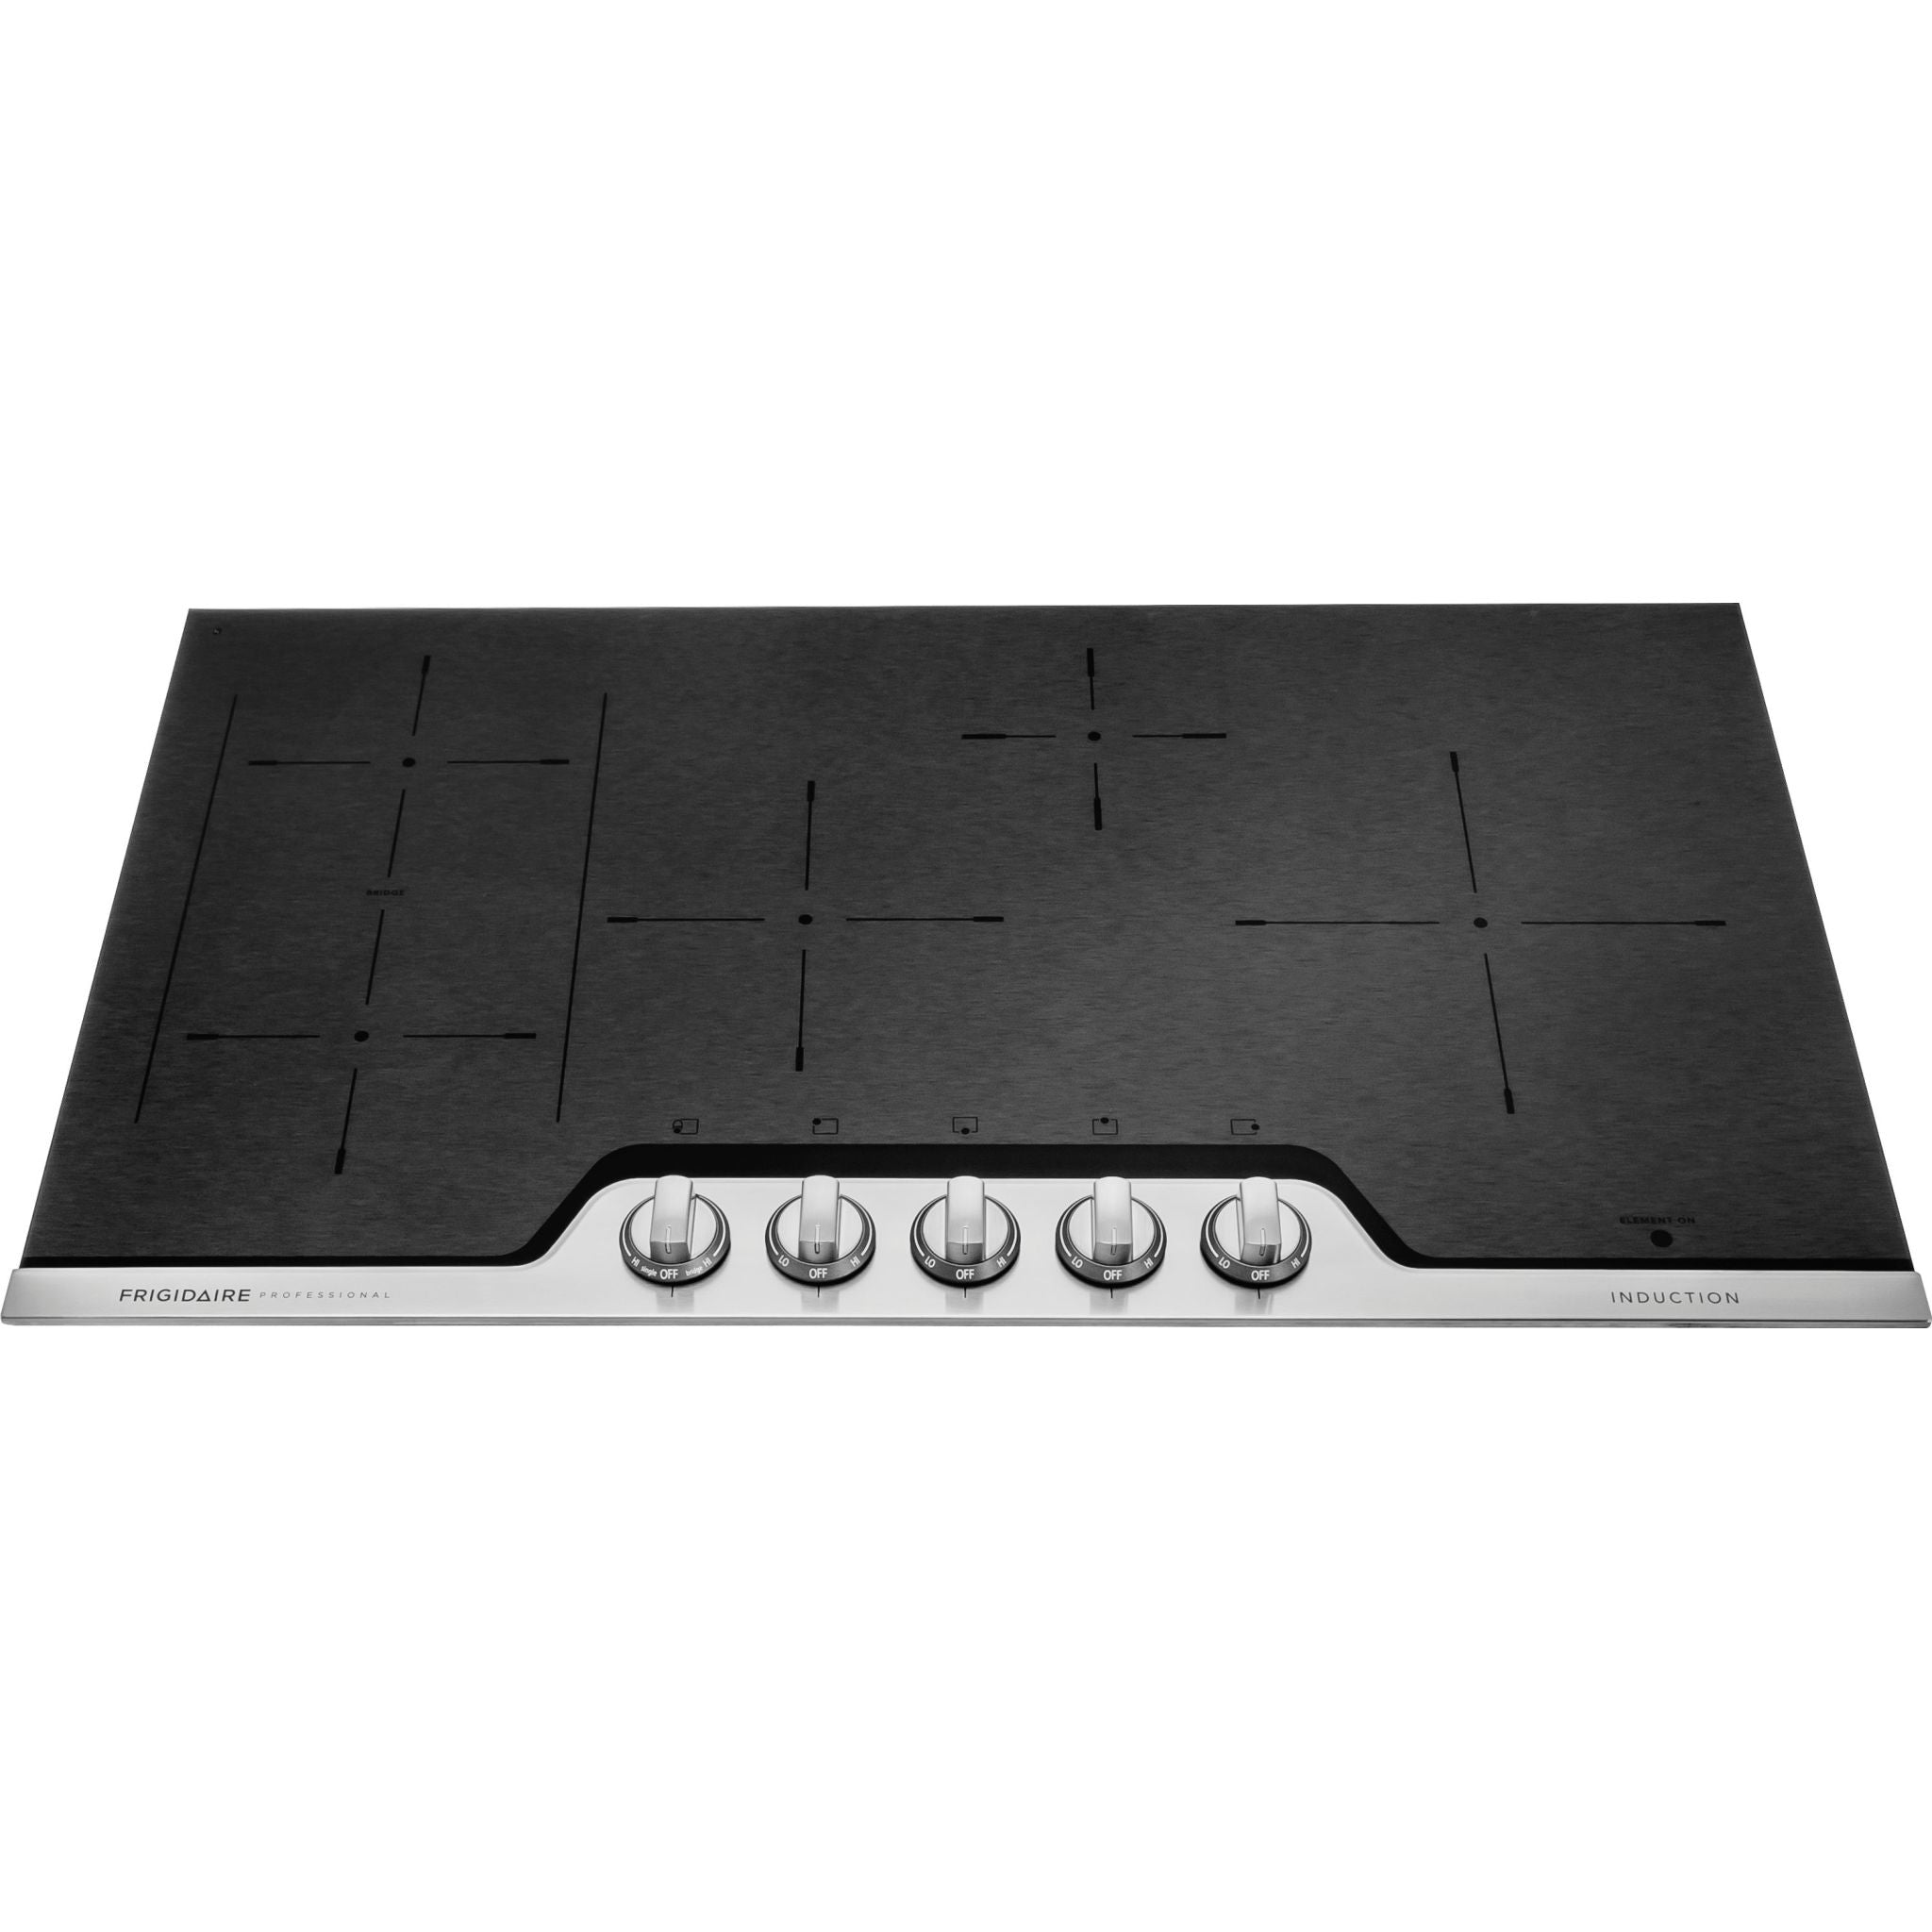 Frigidaire Professional, Frigidaire Professional 36" Induction Cooktop (FPIC3677RF) - Stainless Steel